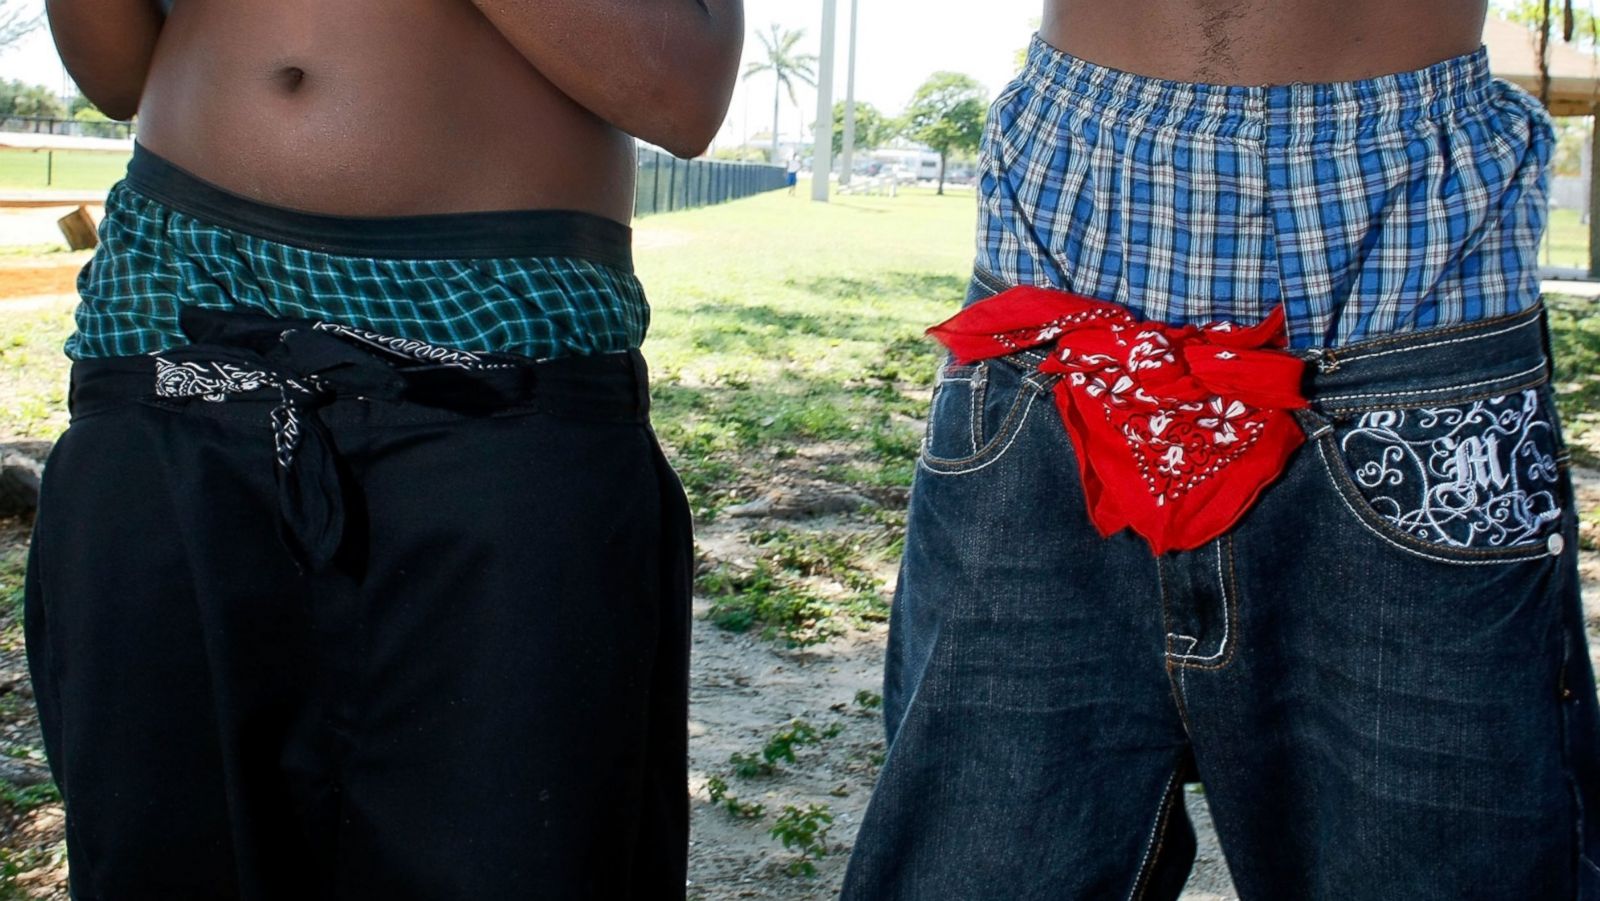 Eat dinner innovation Outdoor Meet the Passionate 'Driving Force' Behind Fla. City's Saggy Pants Ban -  ABC News